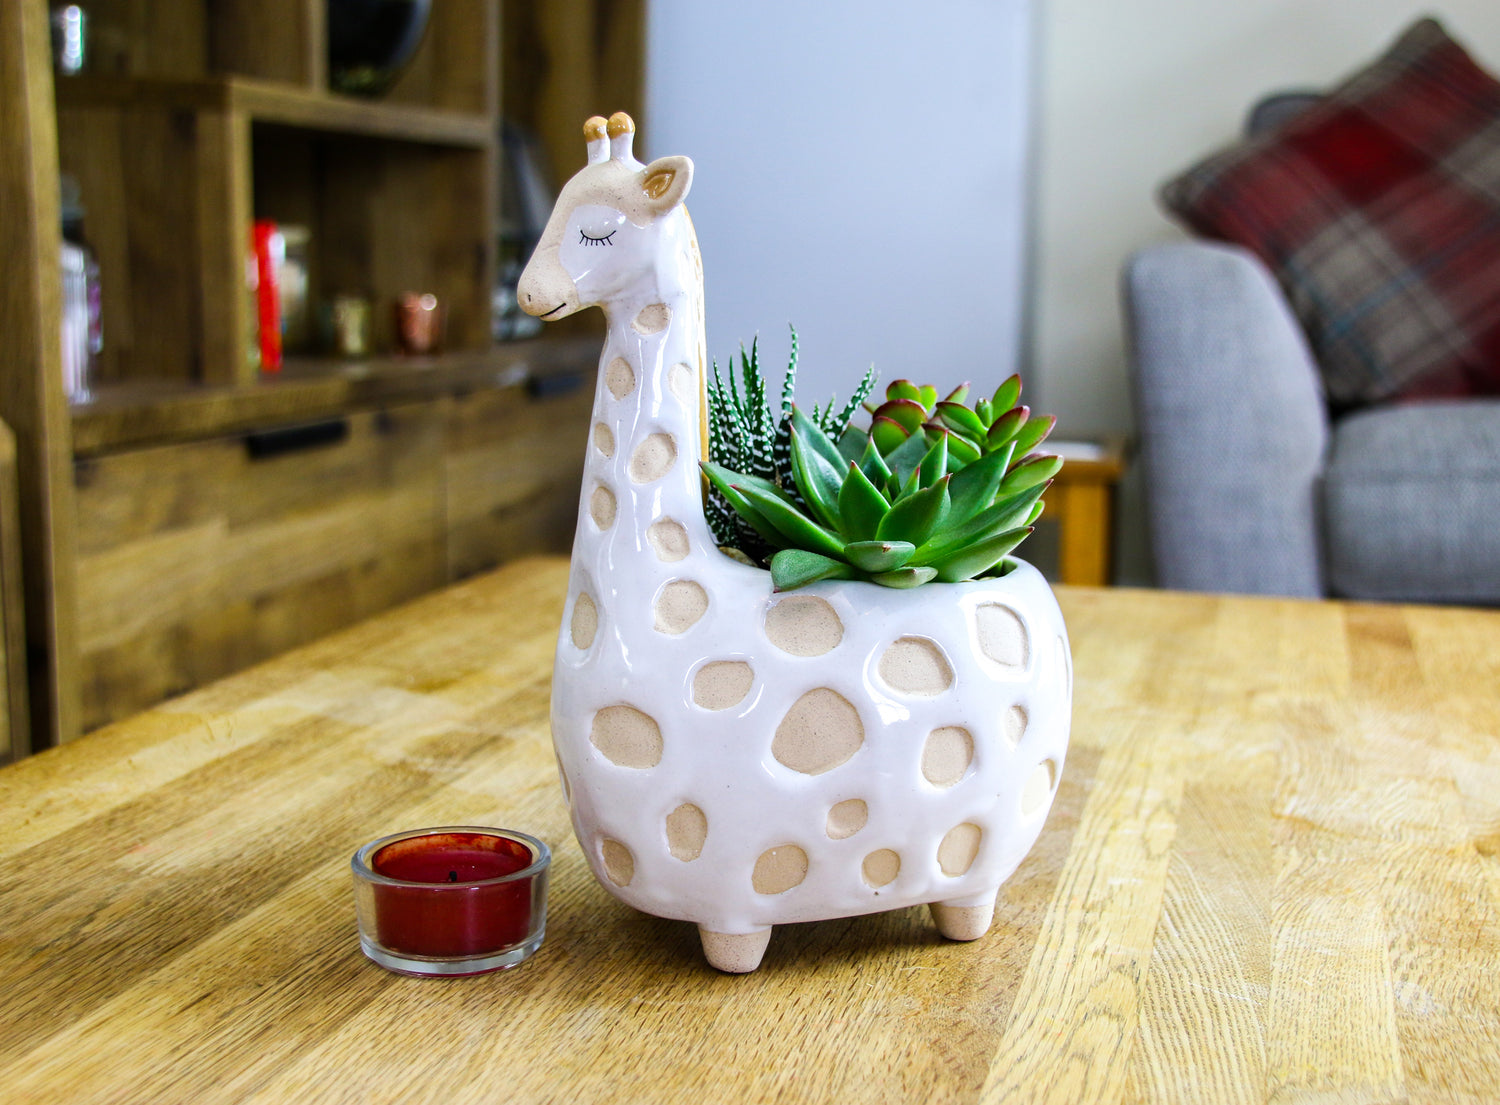 Gina Giraffe Planter with real succulent house plants